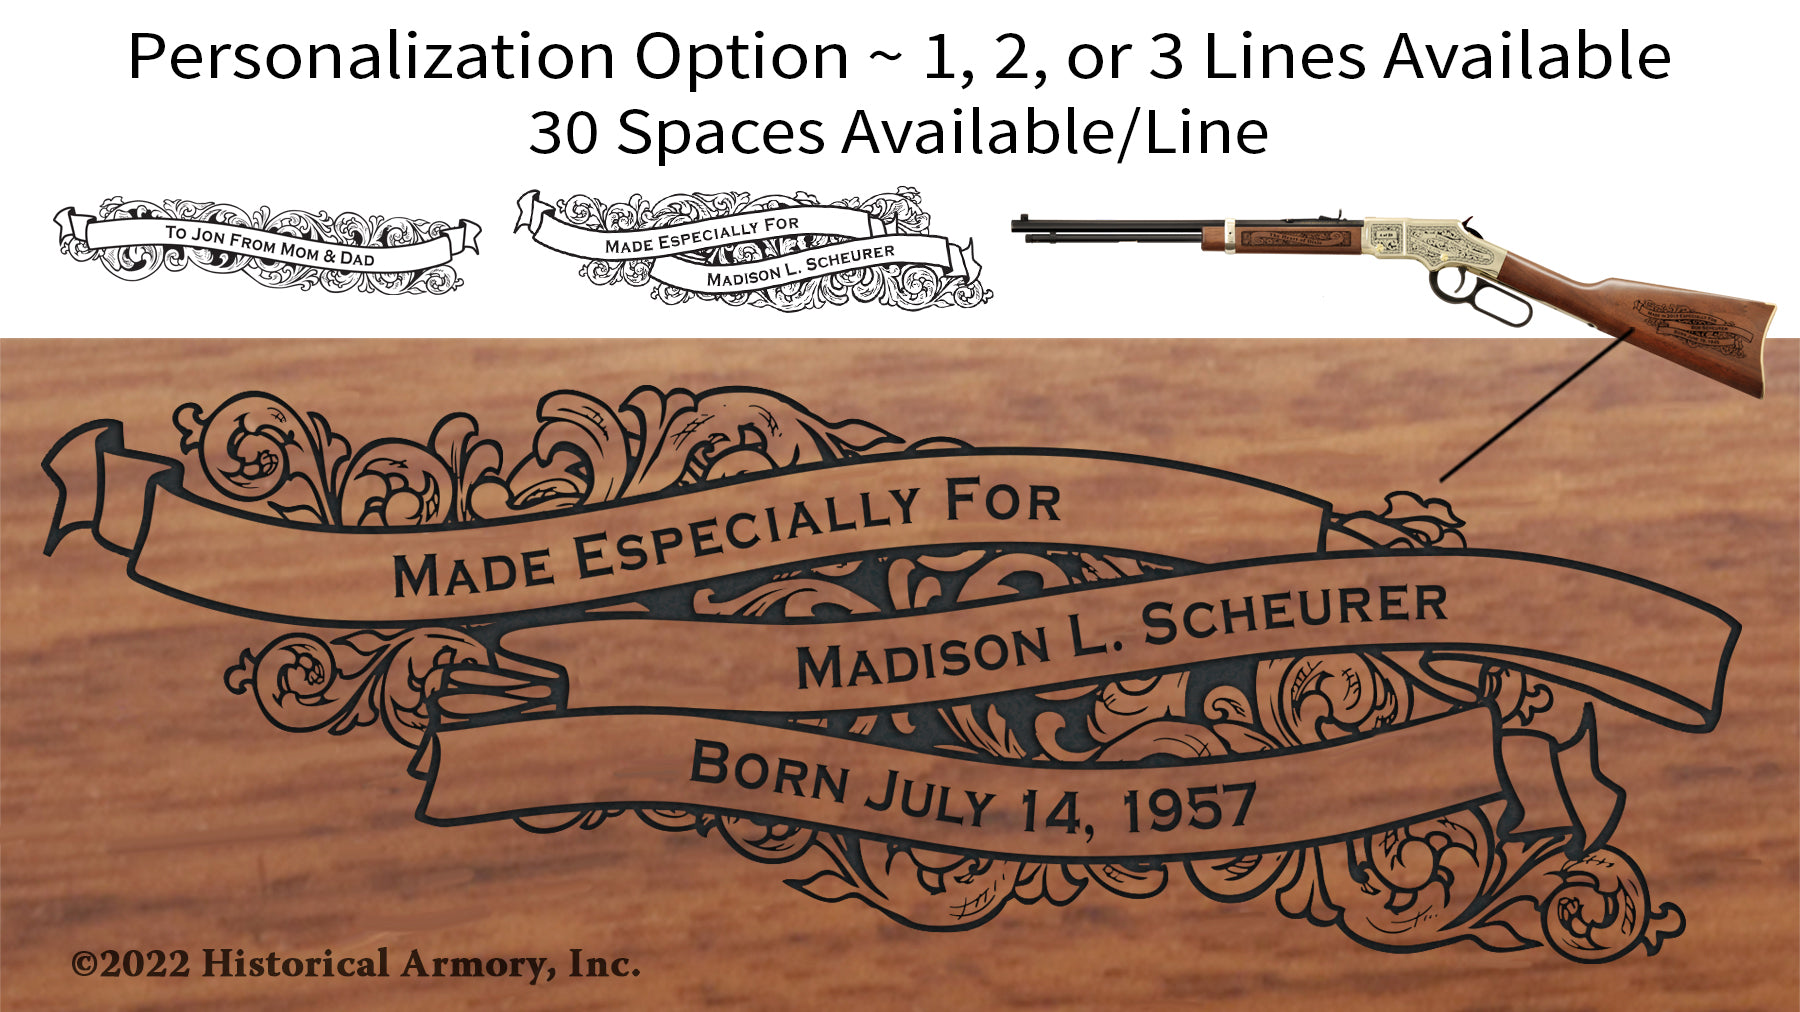 Taney County Missouri Engraved Rifle Personalization